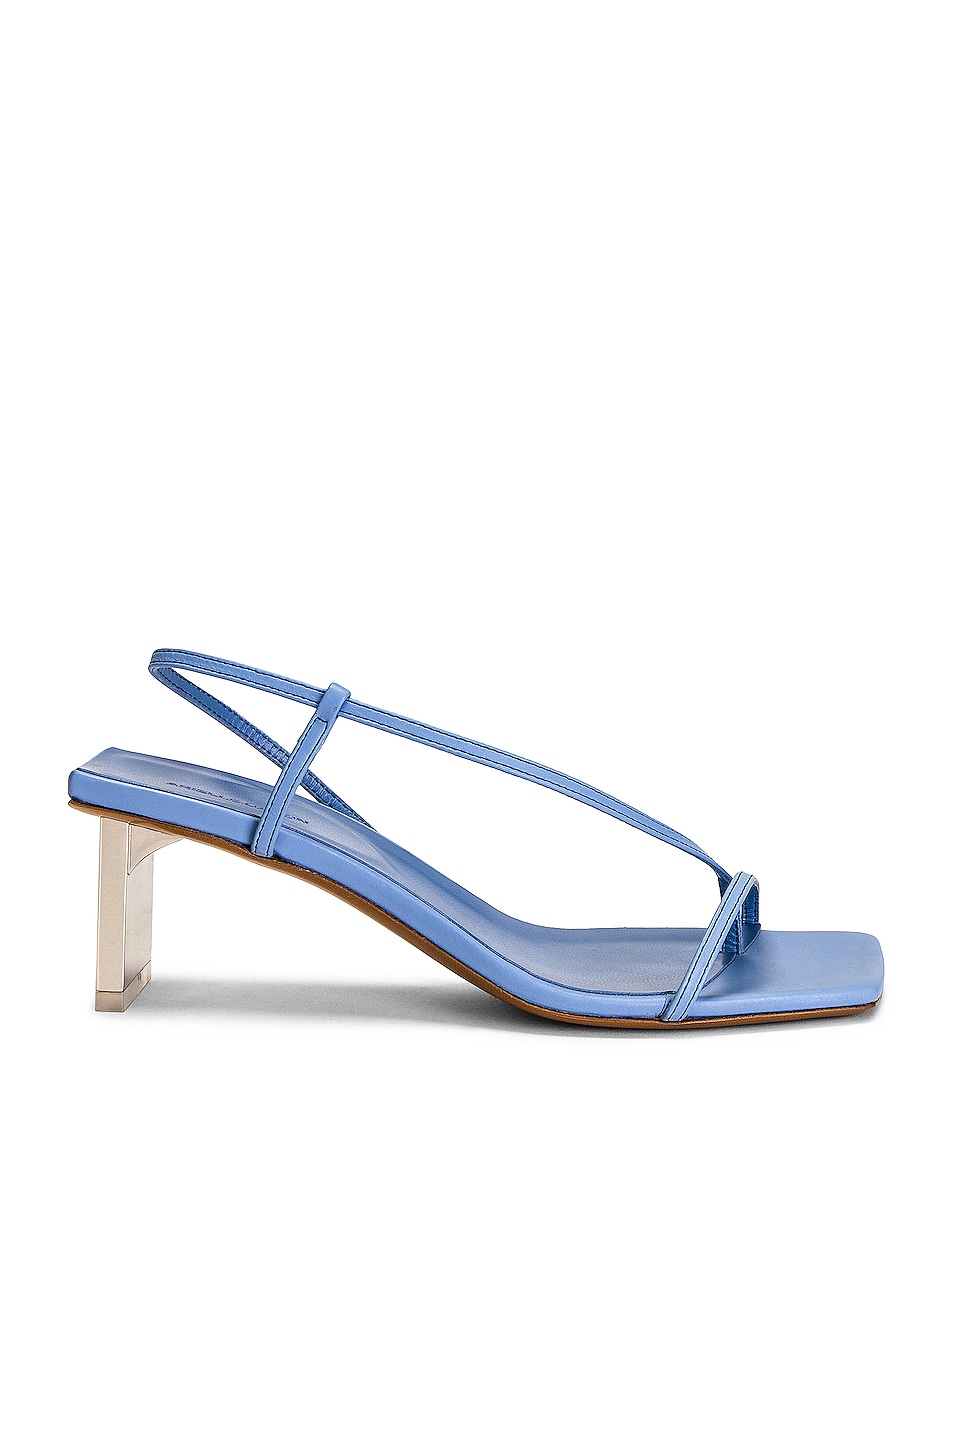 Image 1 of Arielle Baron Narcissus 55 Heel in Vista Blue